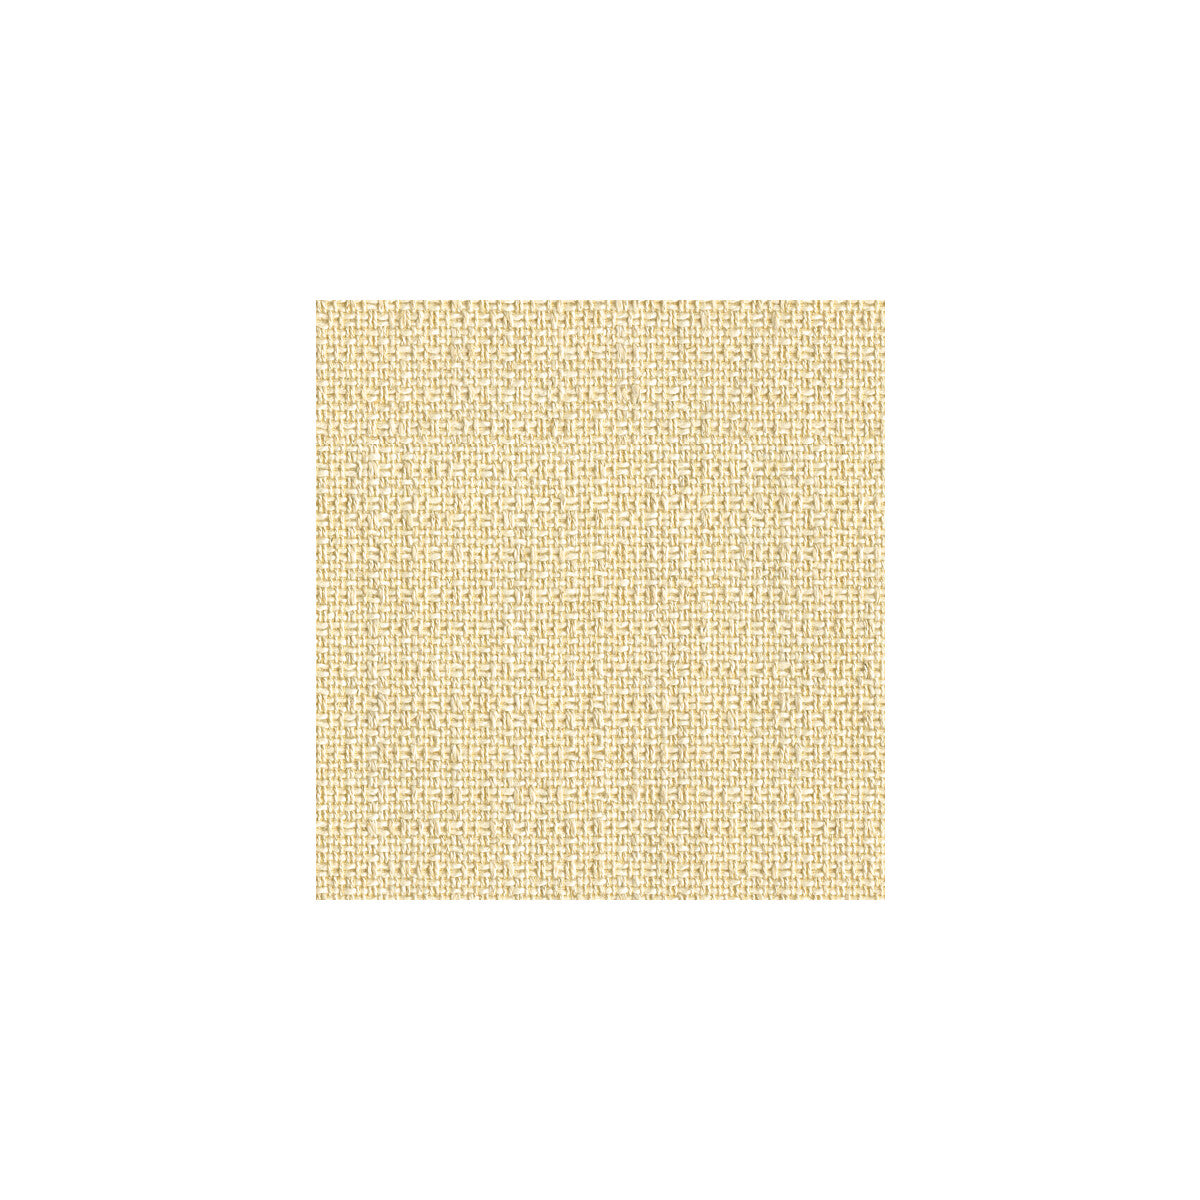 Cartmel fabric in cream color - pattern 2012121.1.0 - by Lee Jofa in the The Karenza collection